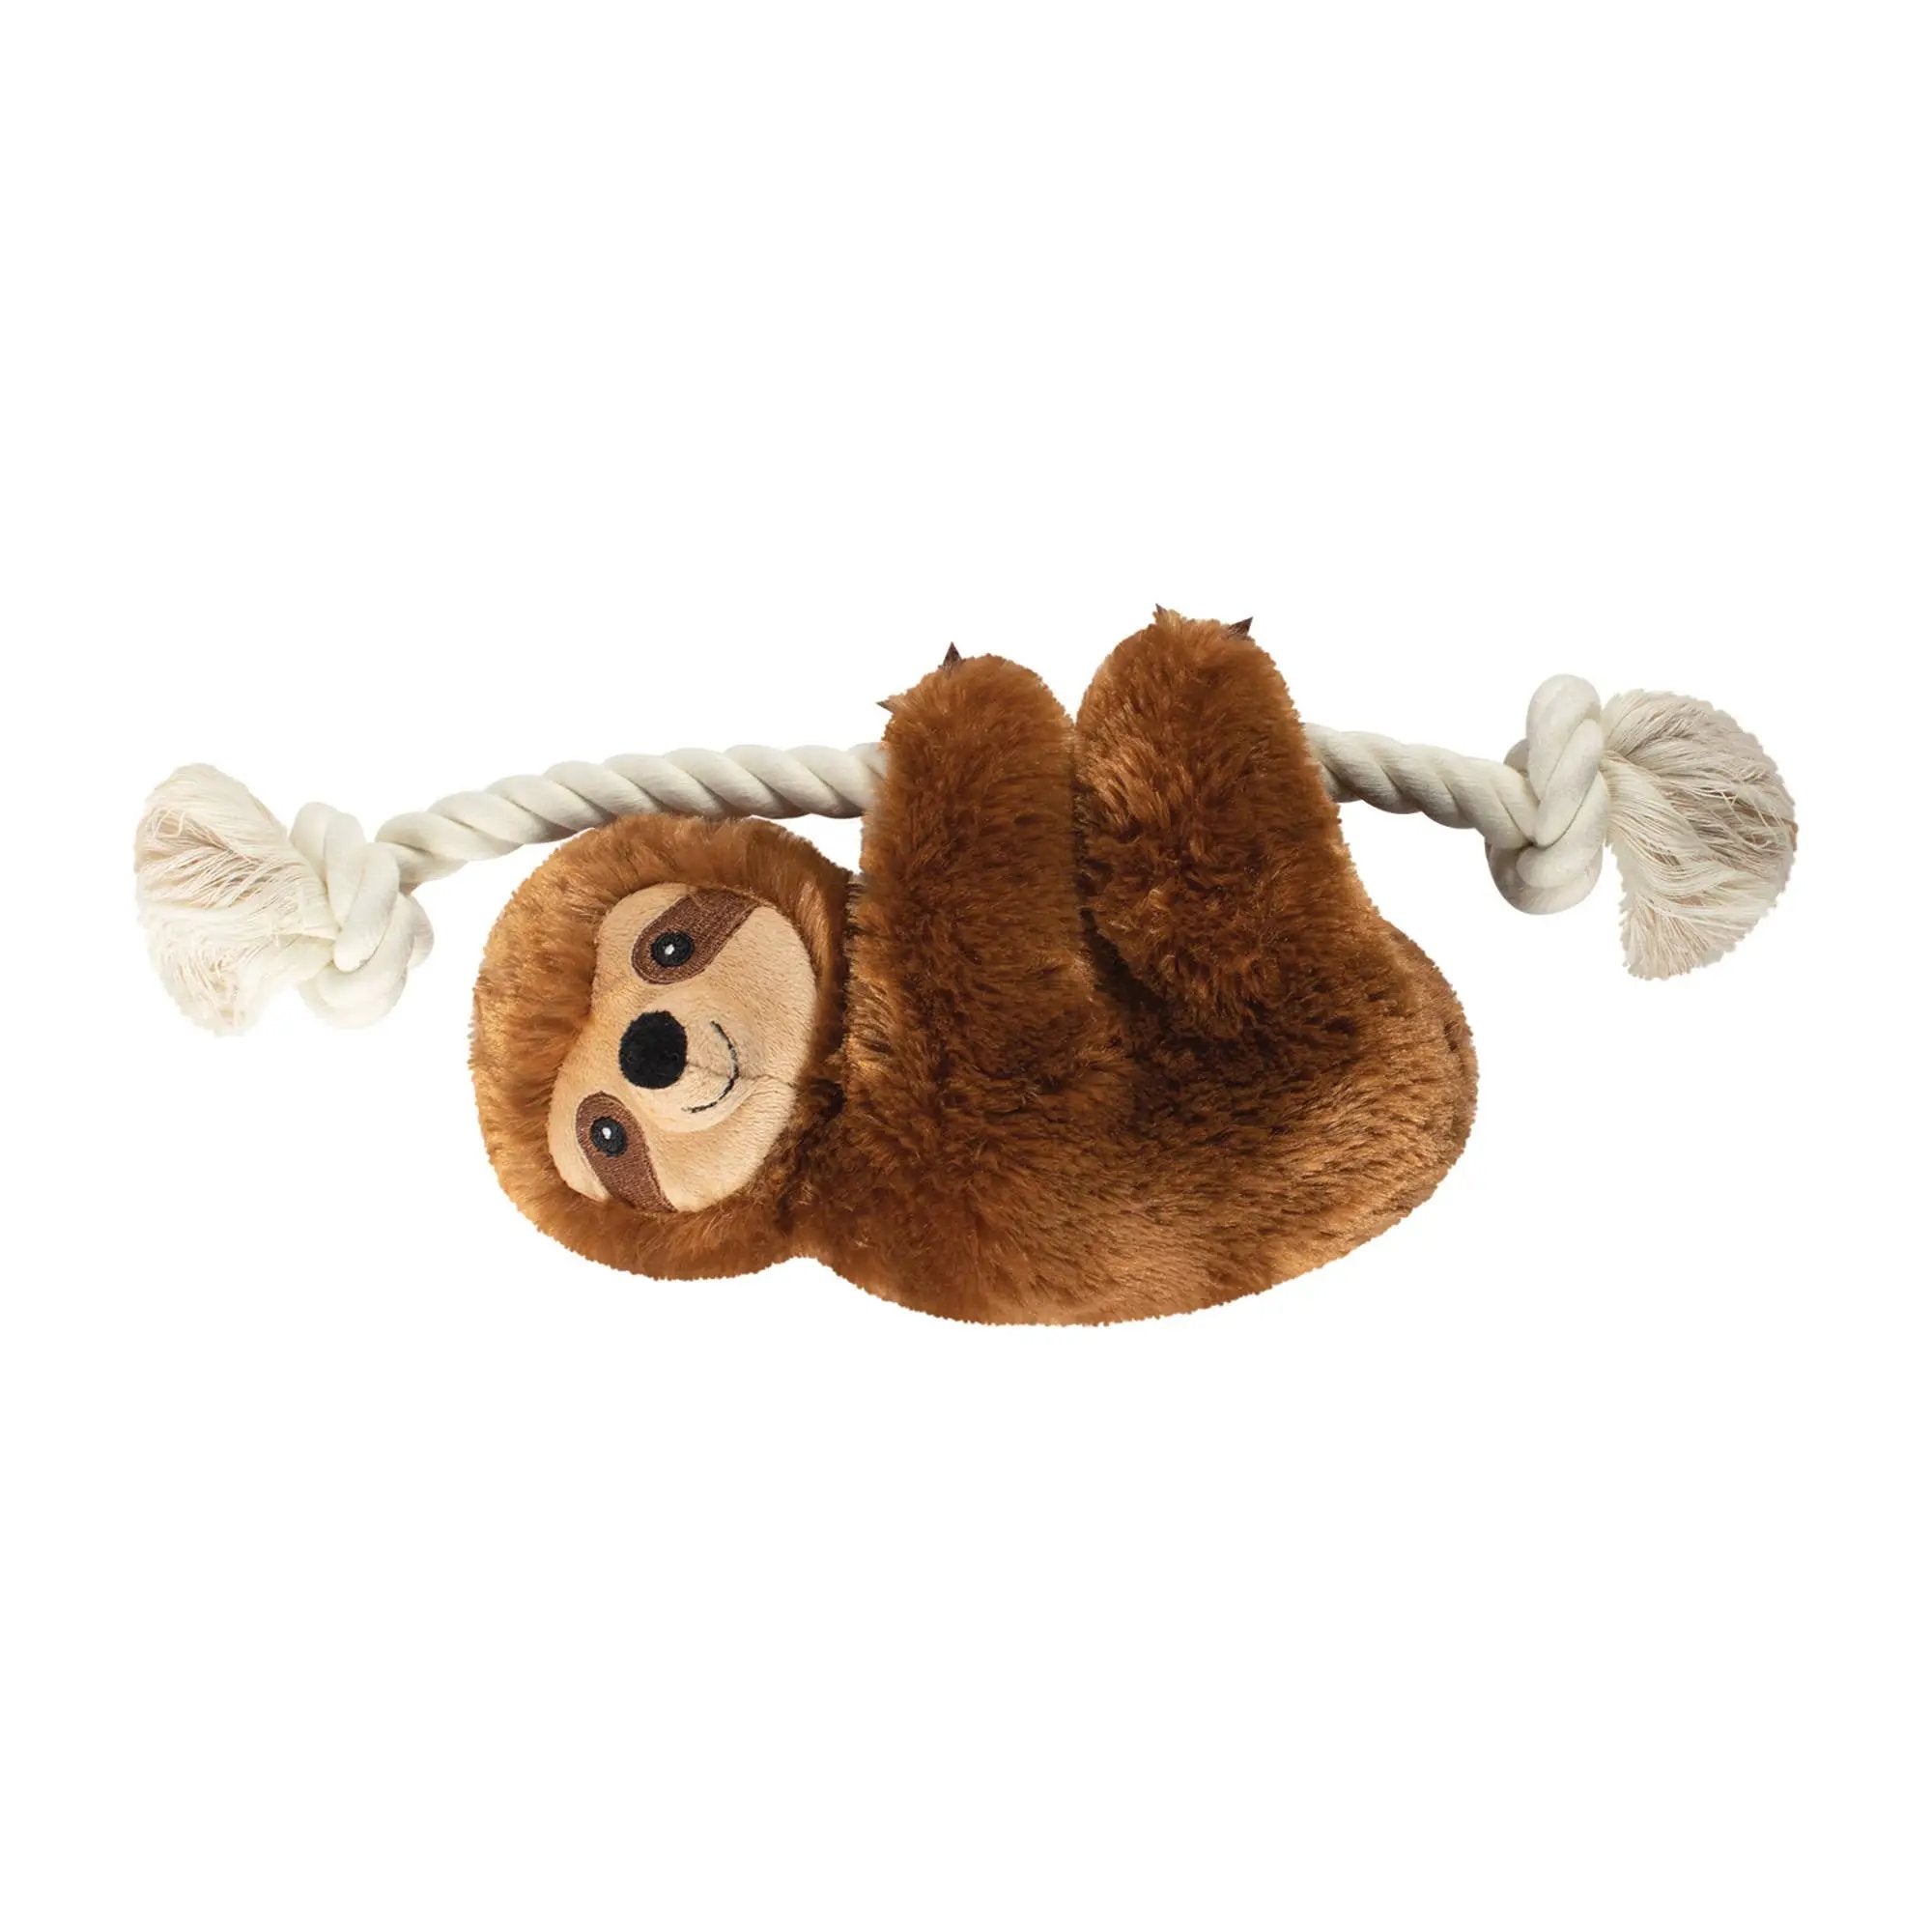 PetShop by Fringe Studio Brown Sloth on a Rope Plush Toy